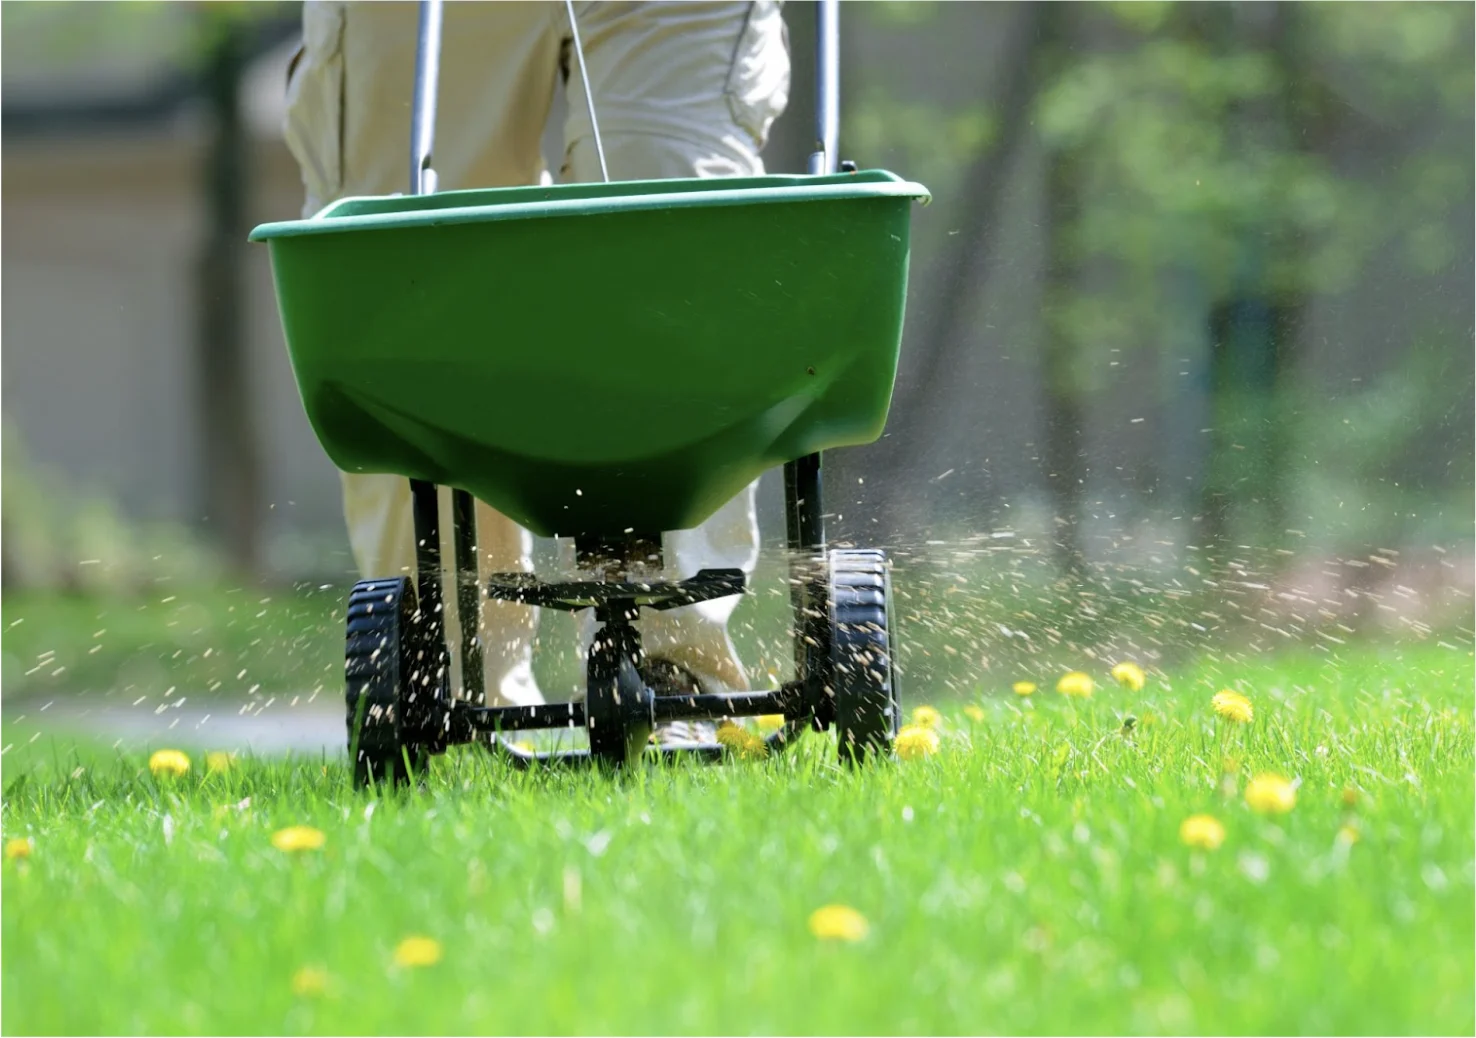 Getty Images: Feeding the lawn, lawn care, spring grass